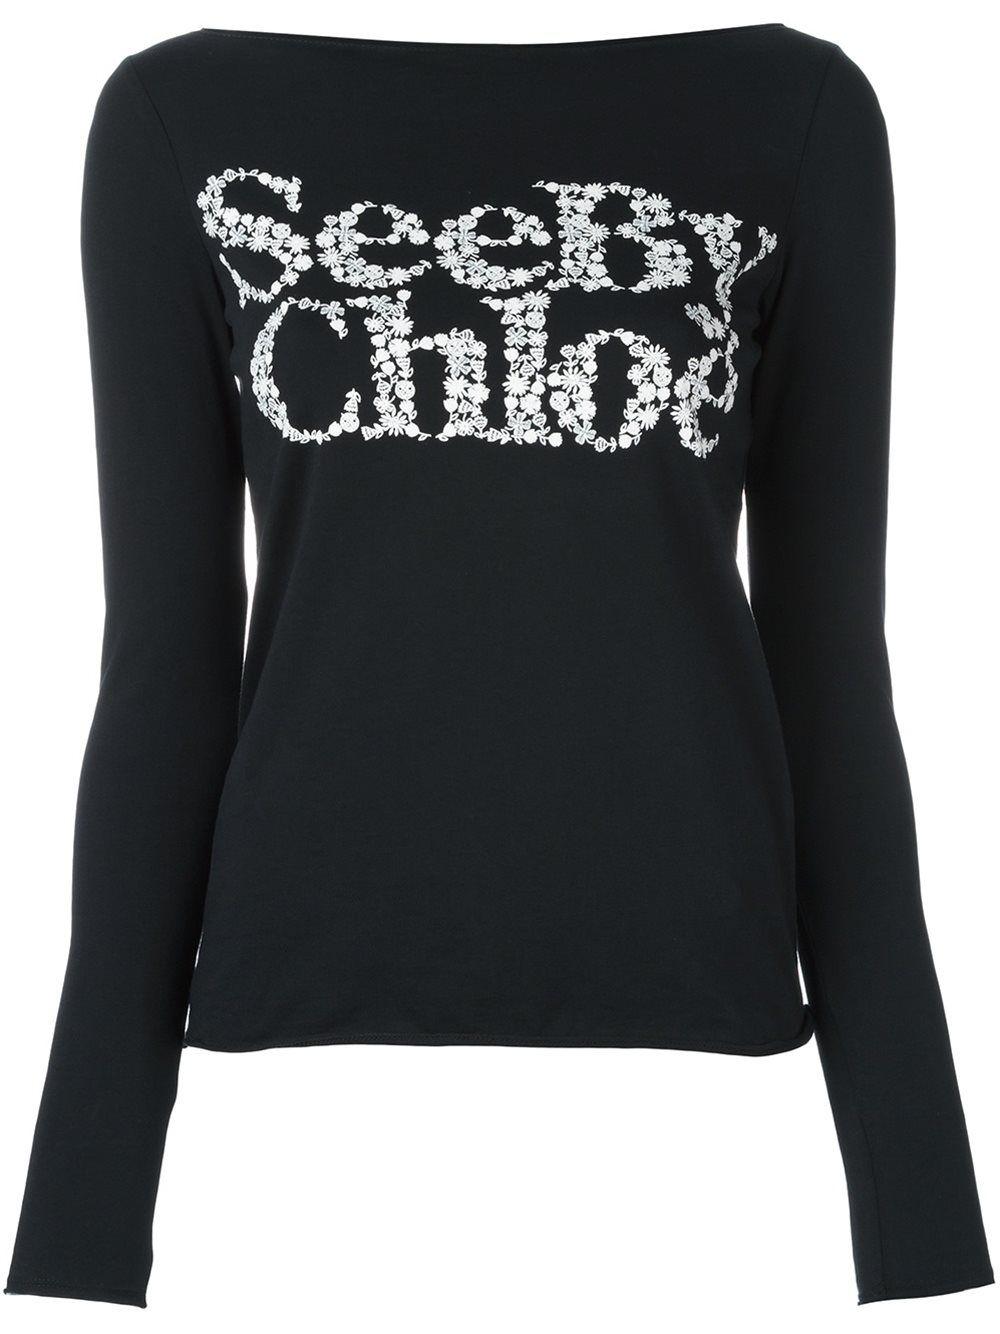 See by Chloe Logo - See by Chloé-Clothing-T-shirts & Jerseys Outlet, See by Chloé ...